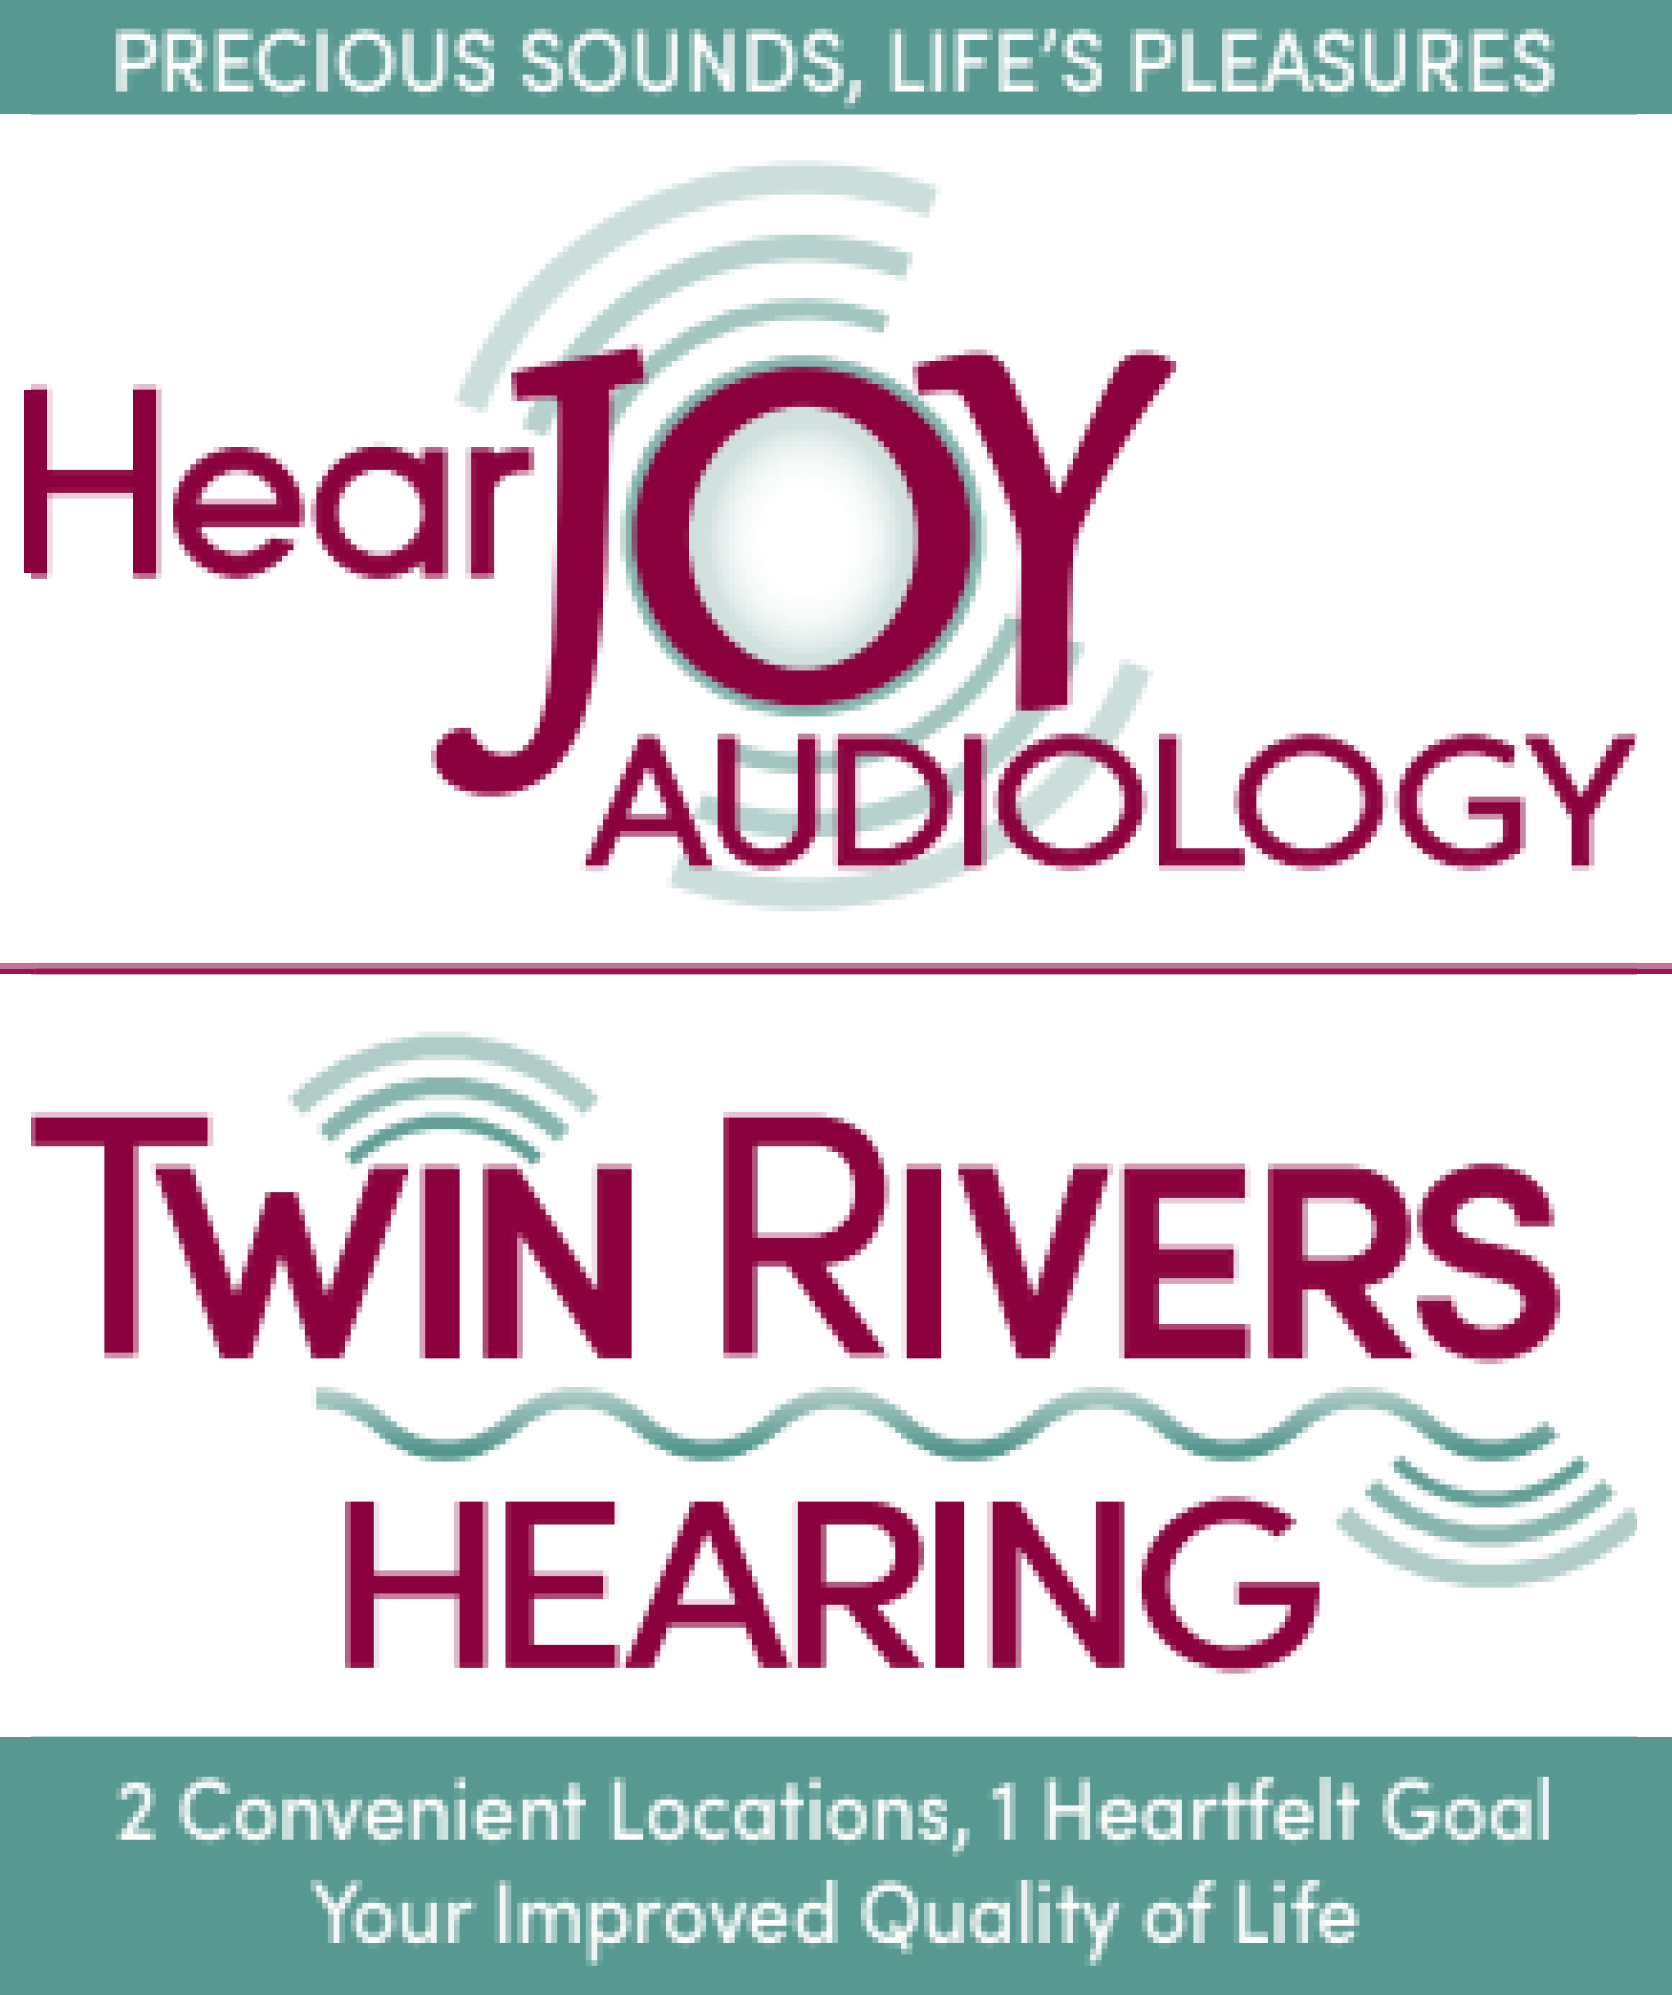 Hear Joy Audiologist and Twin River Hearing